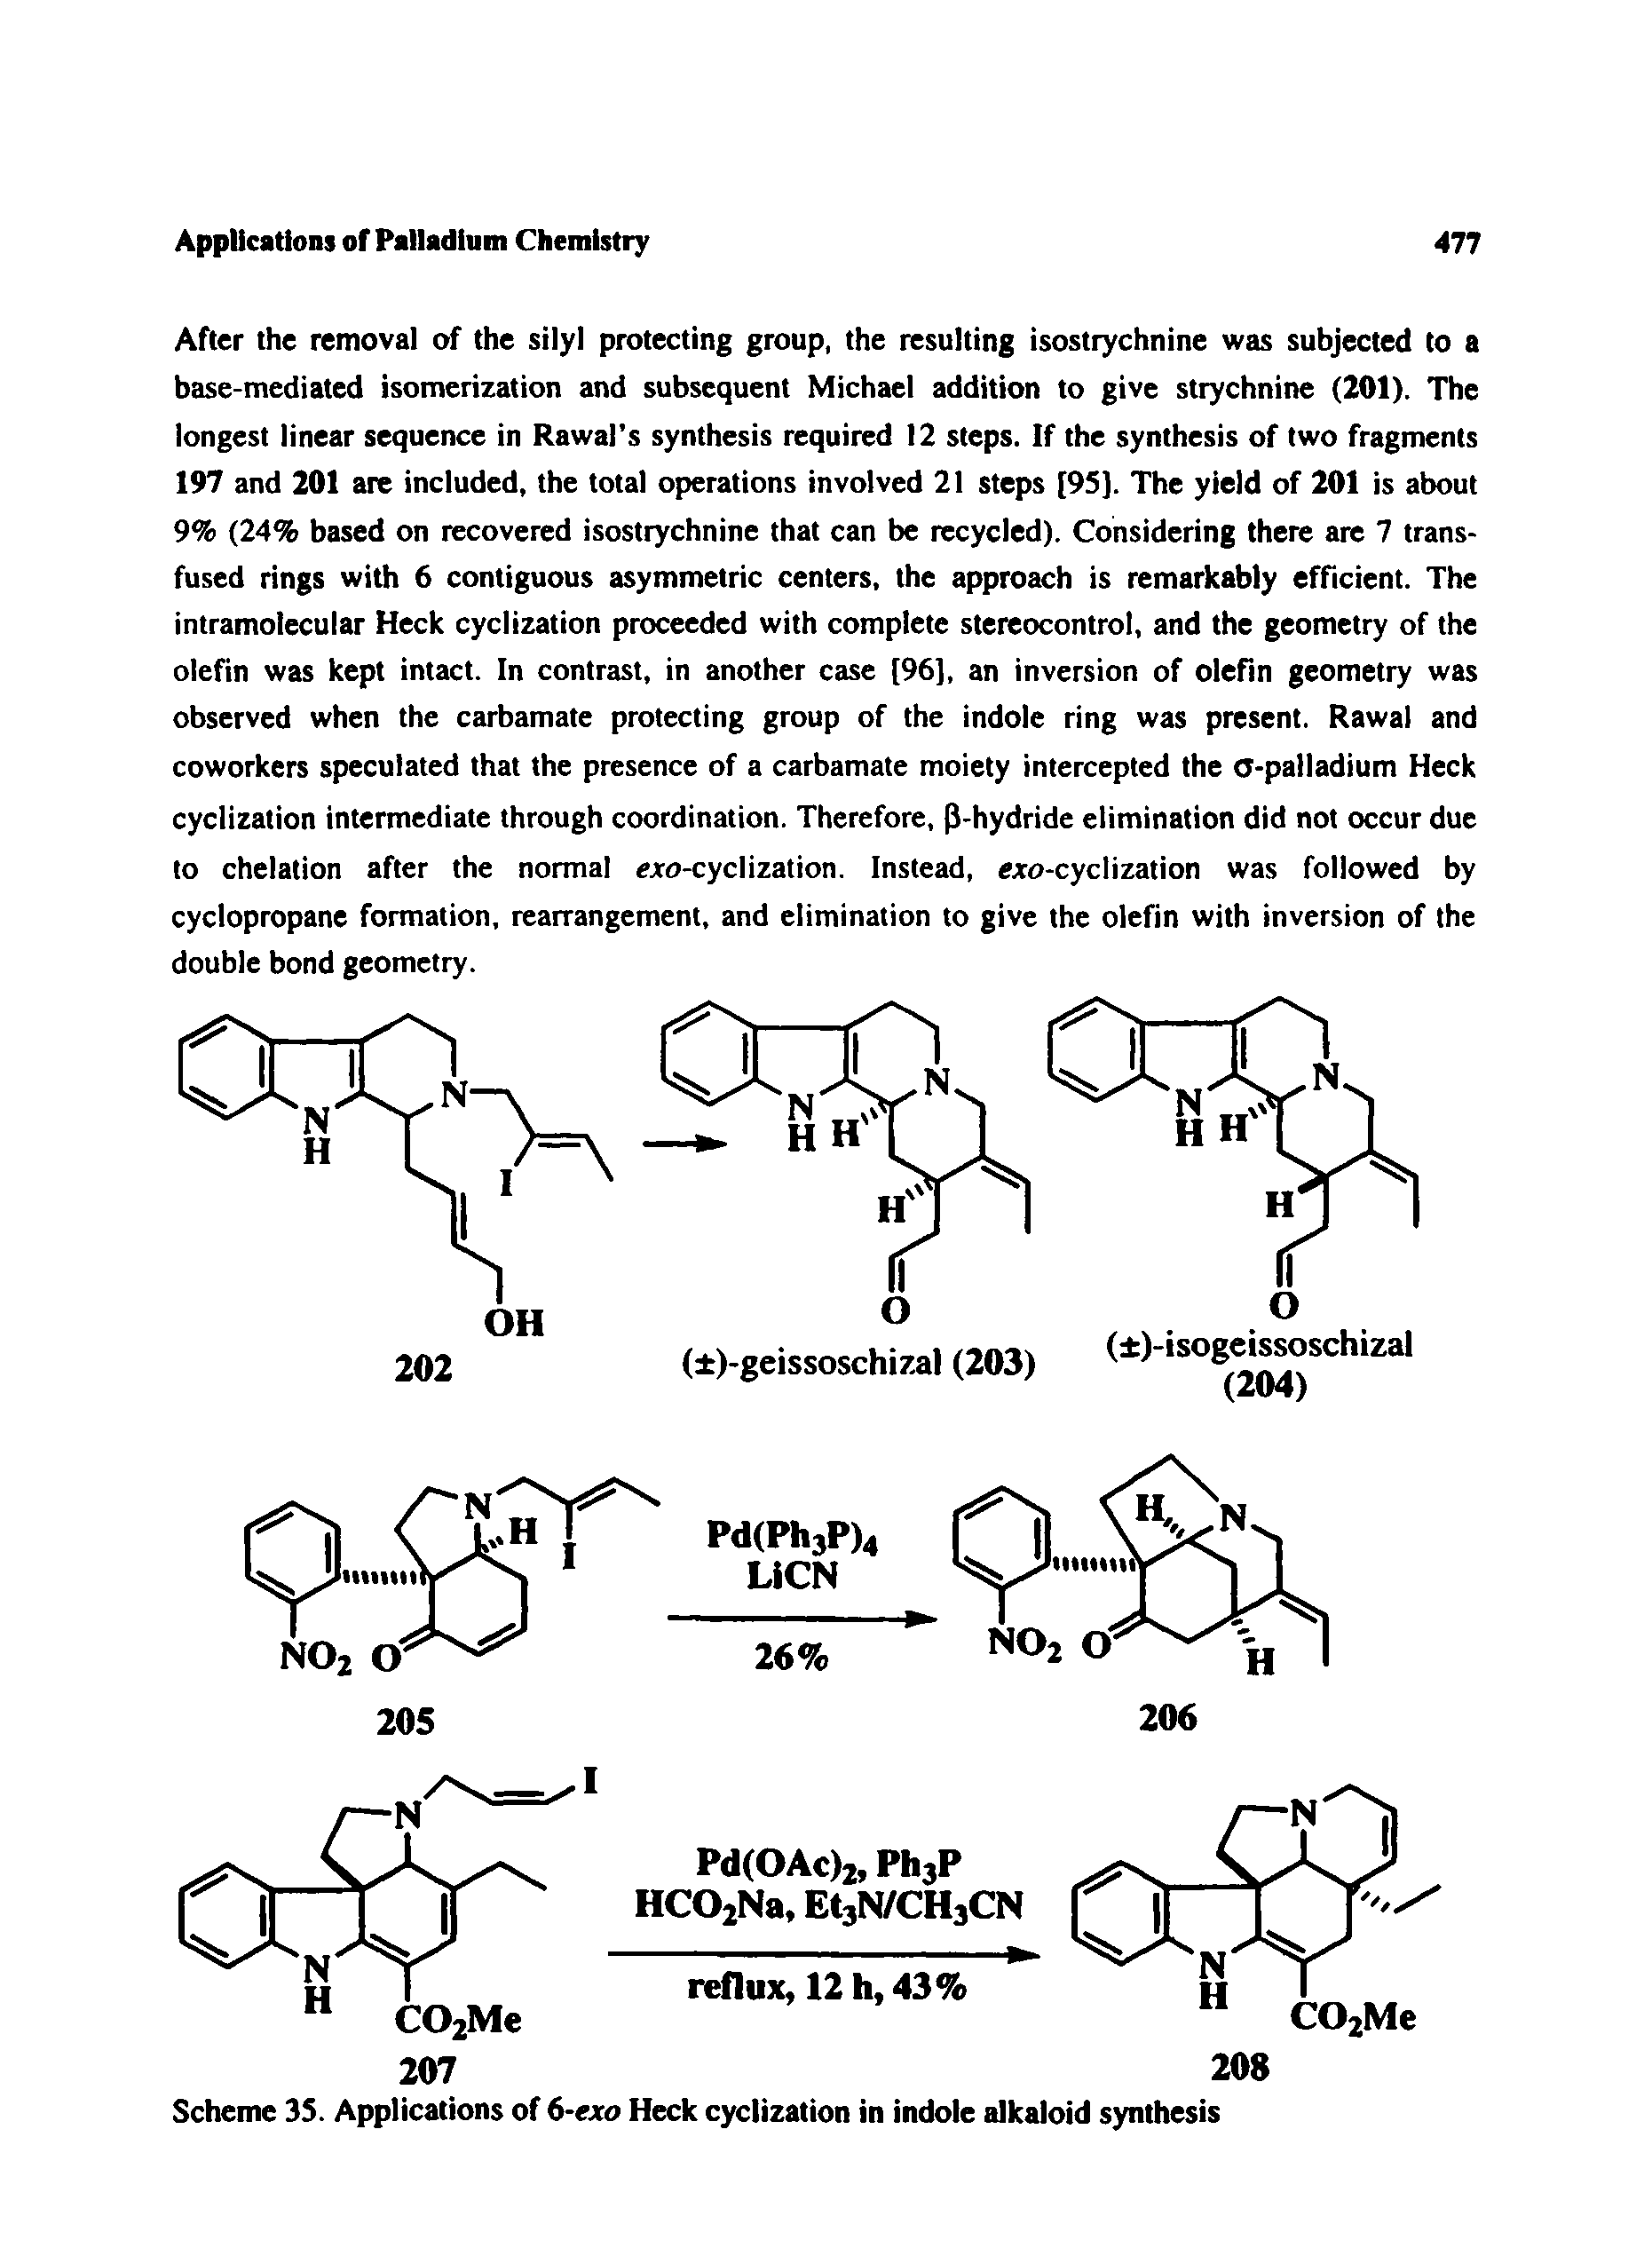 Scheme 35. Applications of 6-exo Heck cyclization in indole alkaloid synthesis...